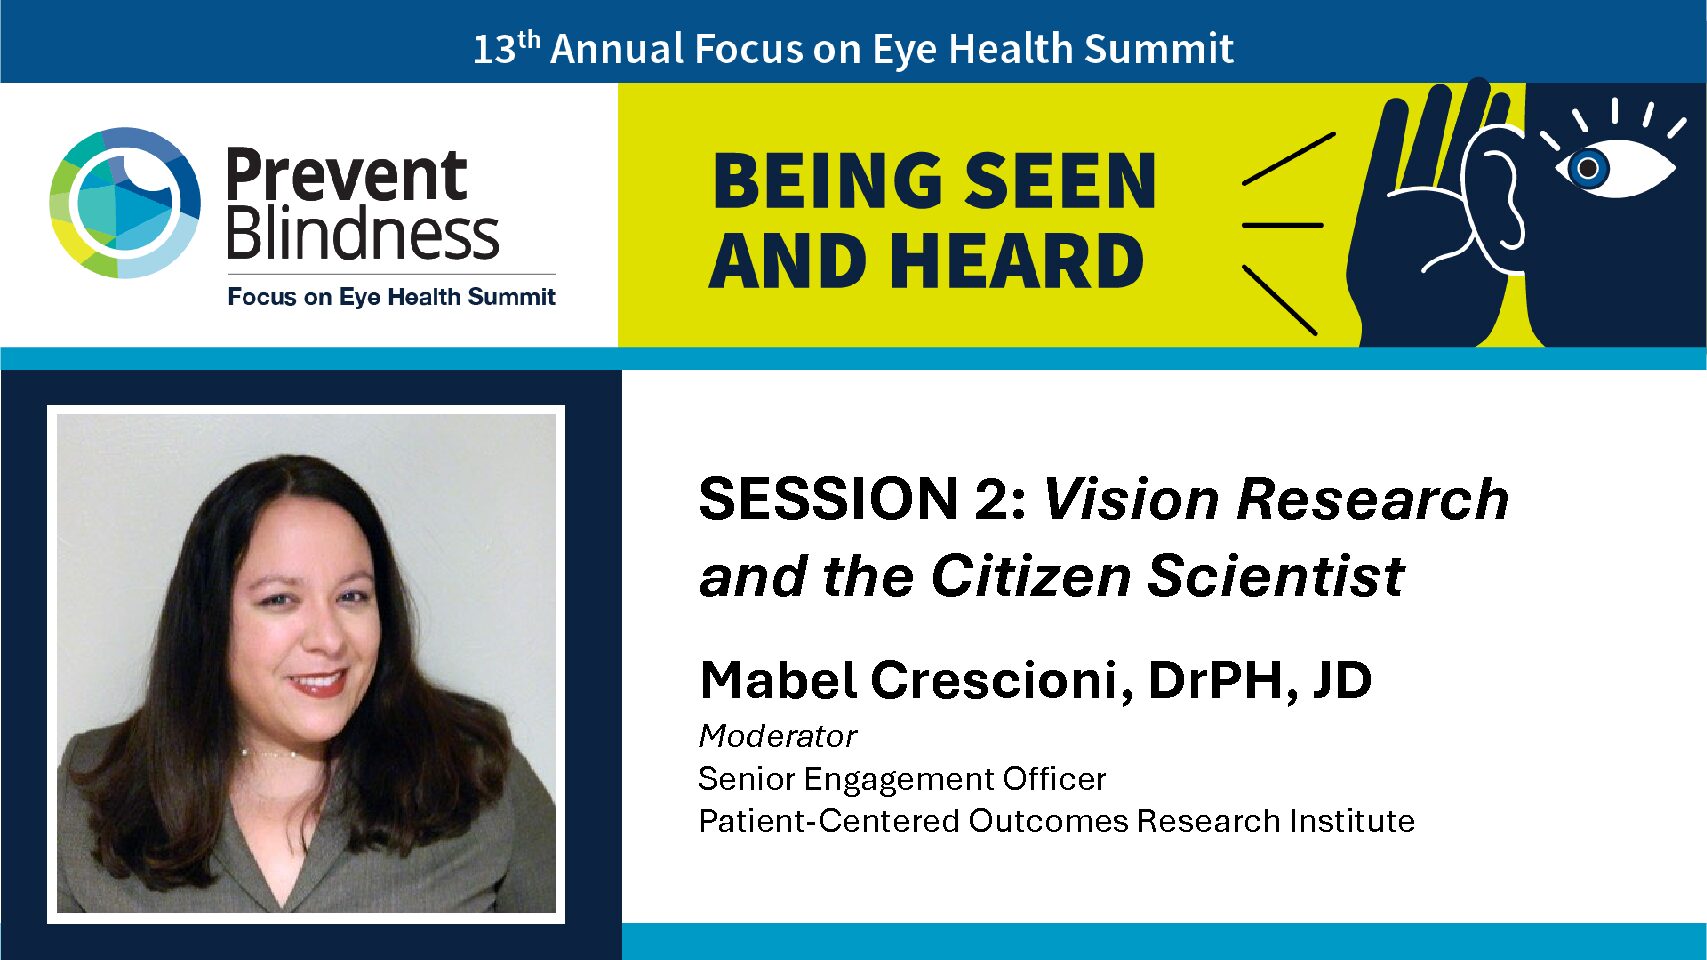 Vision Research and the Citizen Scientist